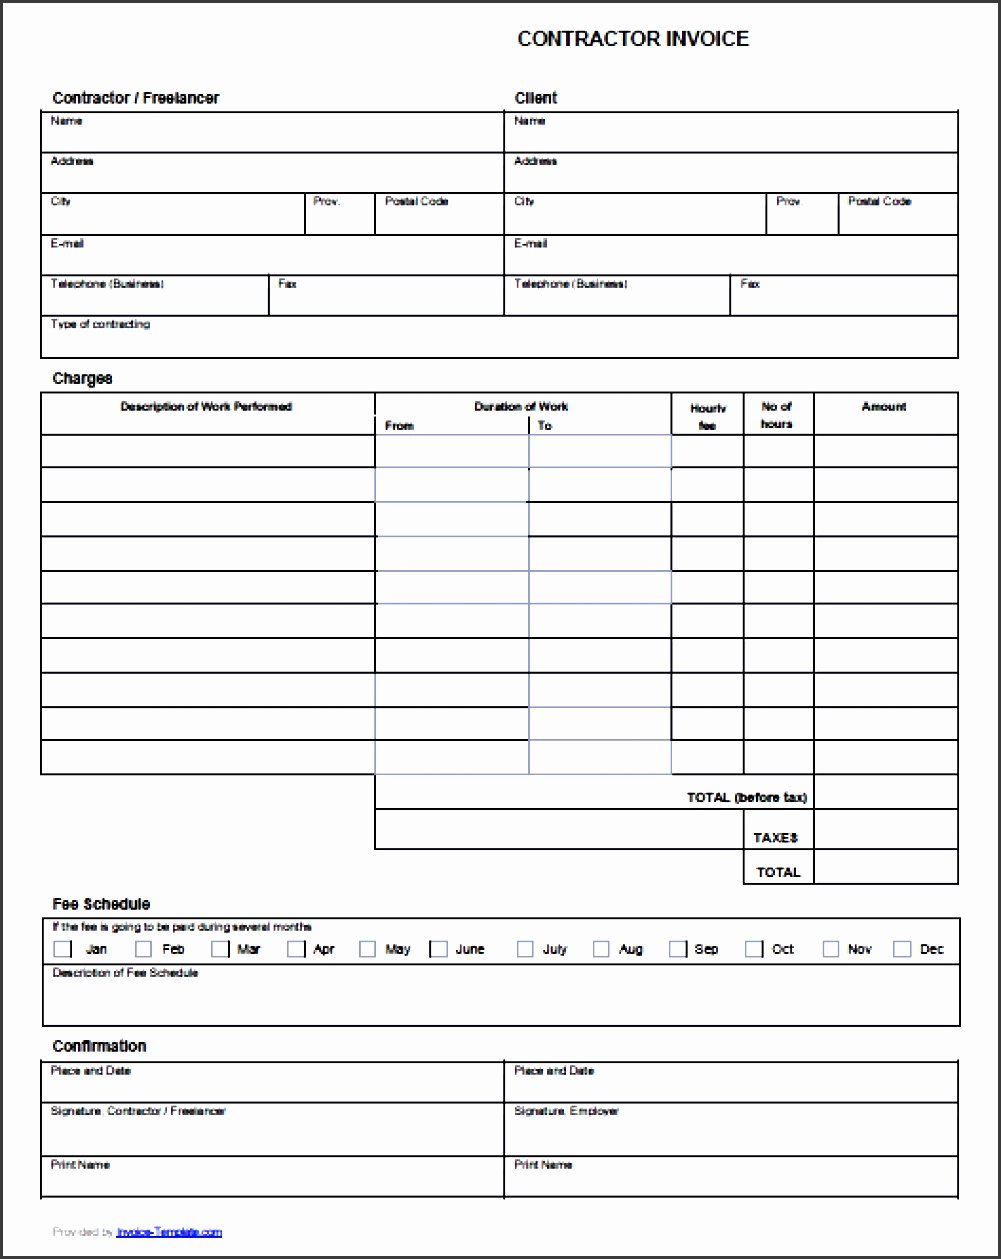 Contractor Invoice Template Excel Awesome Contractor Invoice Template Free Excel Archives